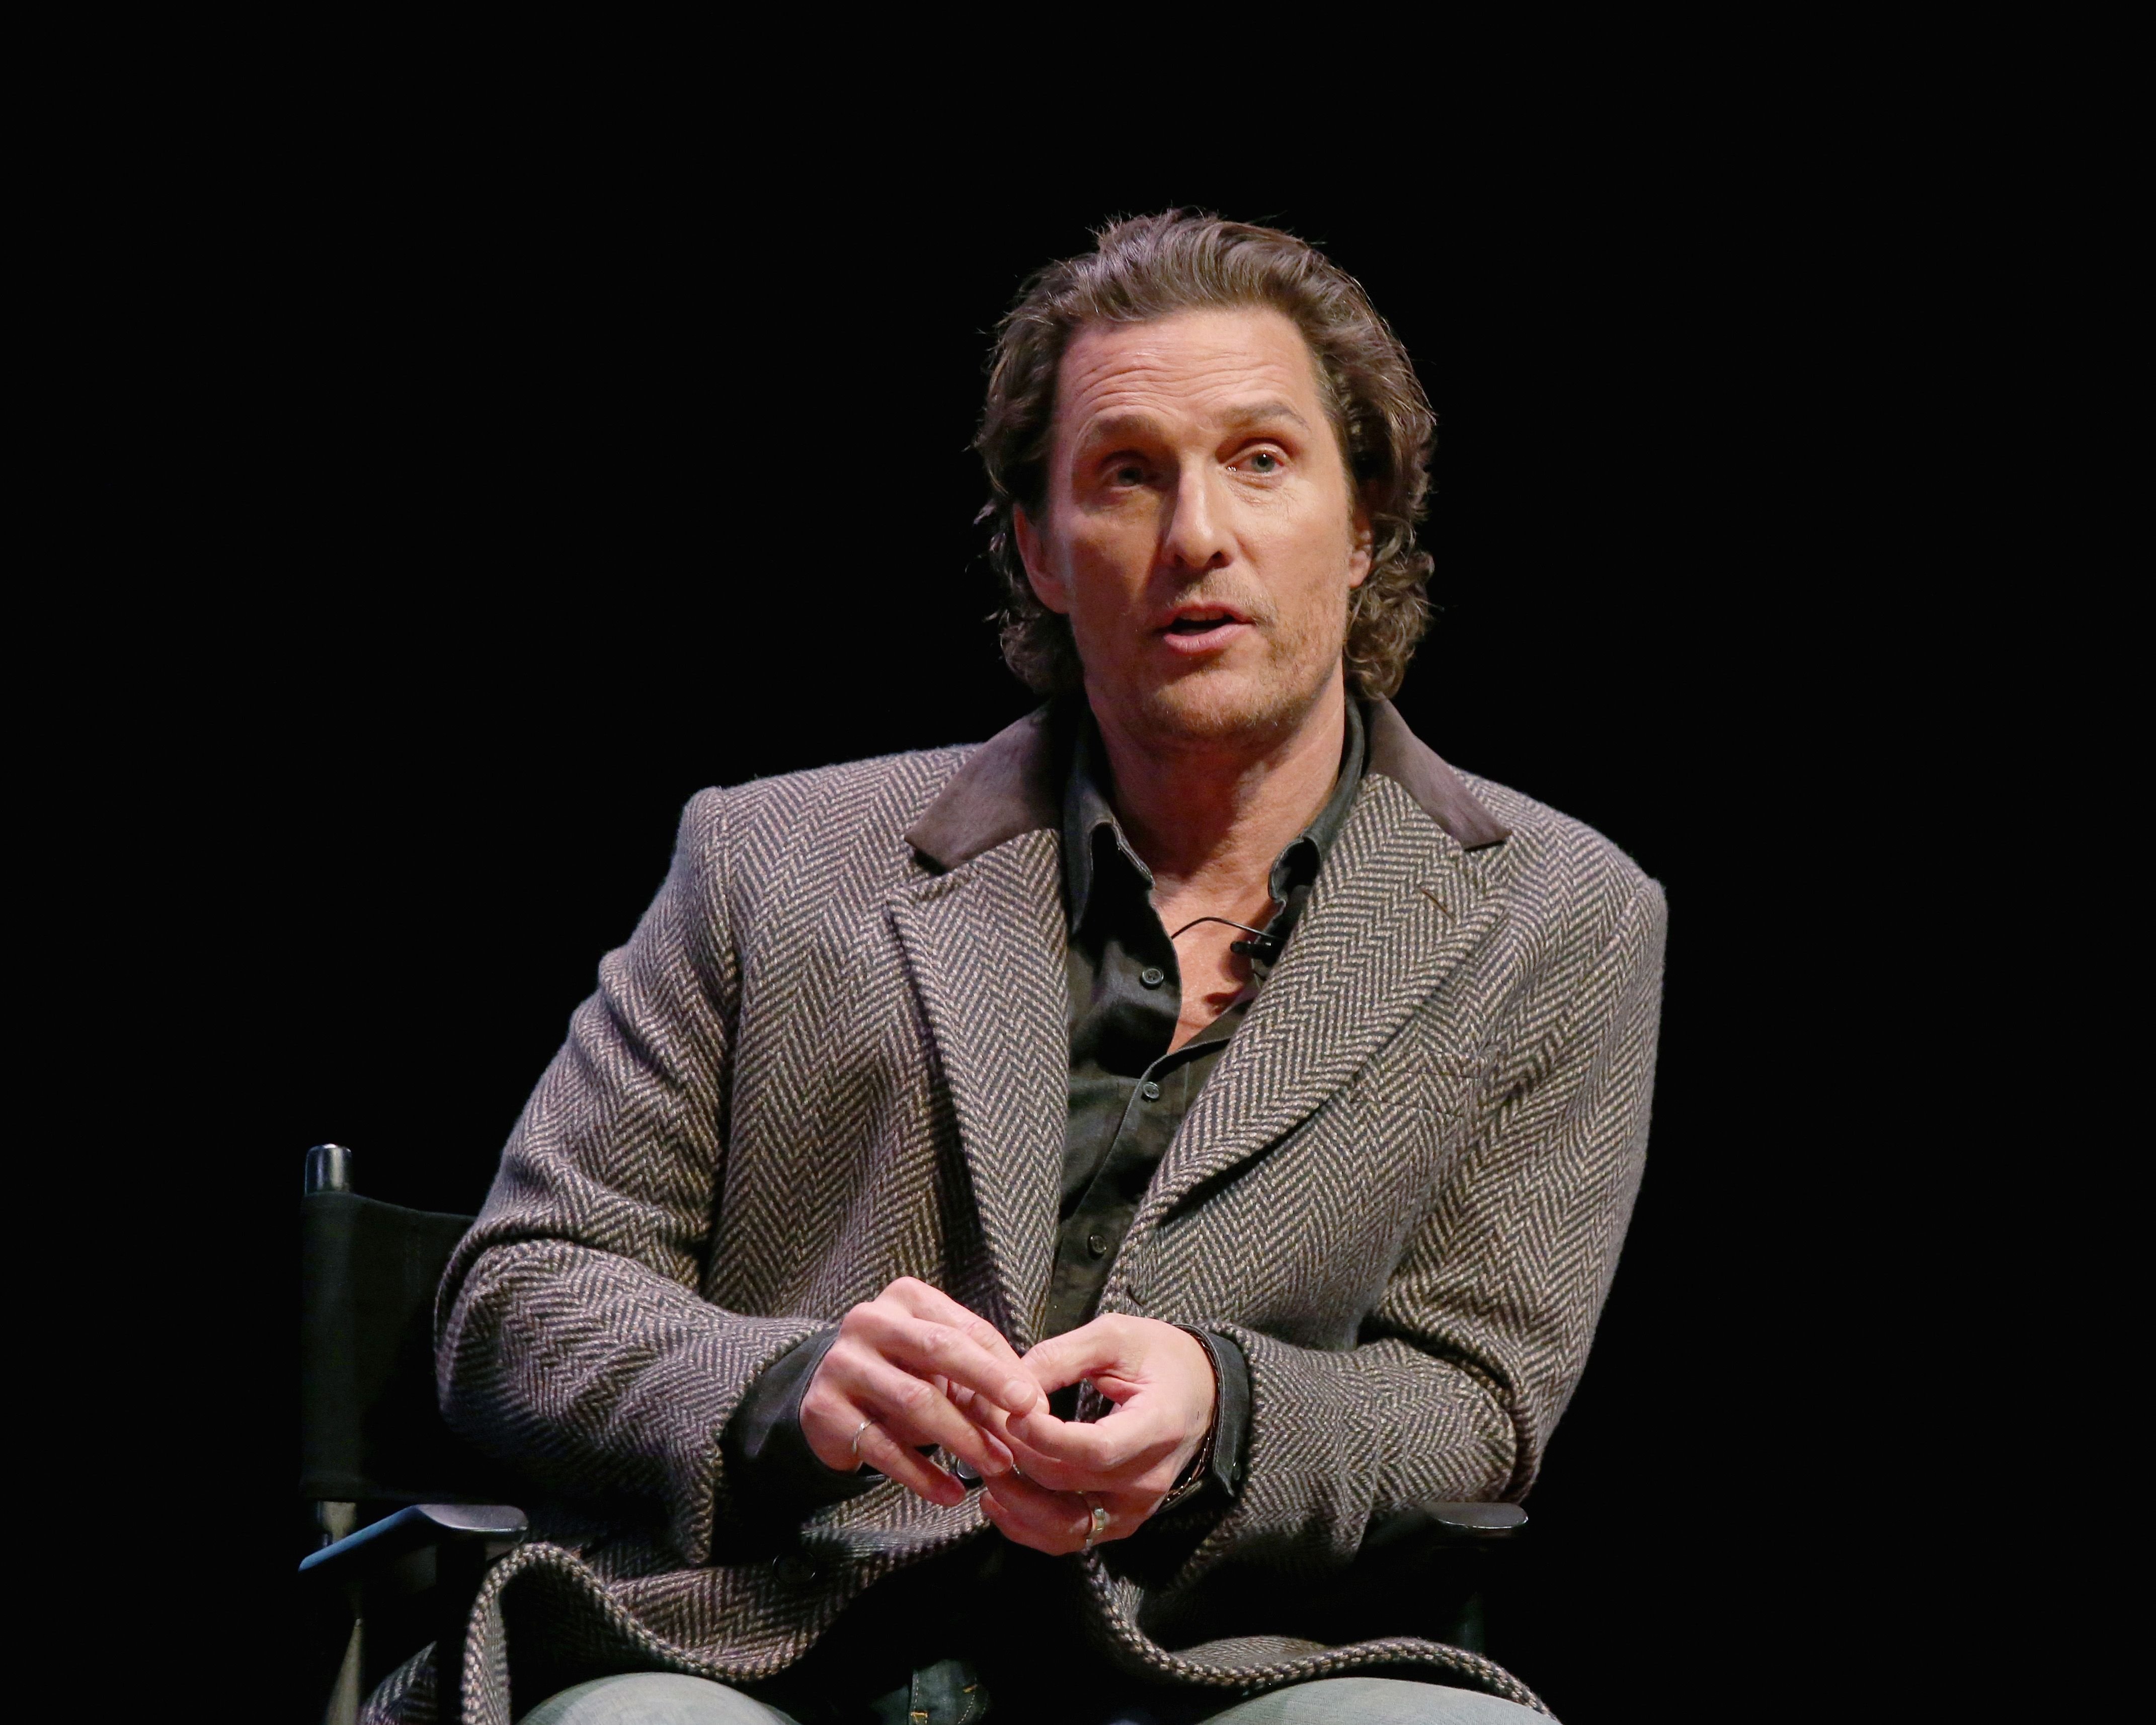 Matthew McConaughey in a Q&A after a special screening of his film "The Gentlemen" at Hogg Memorial Auditorium at The University of Texas at Austin on January 21, 2020 | Photo: Getty Images